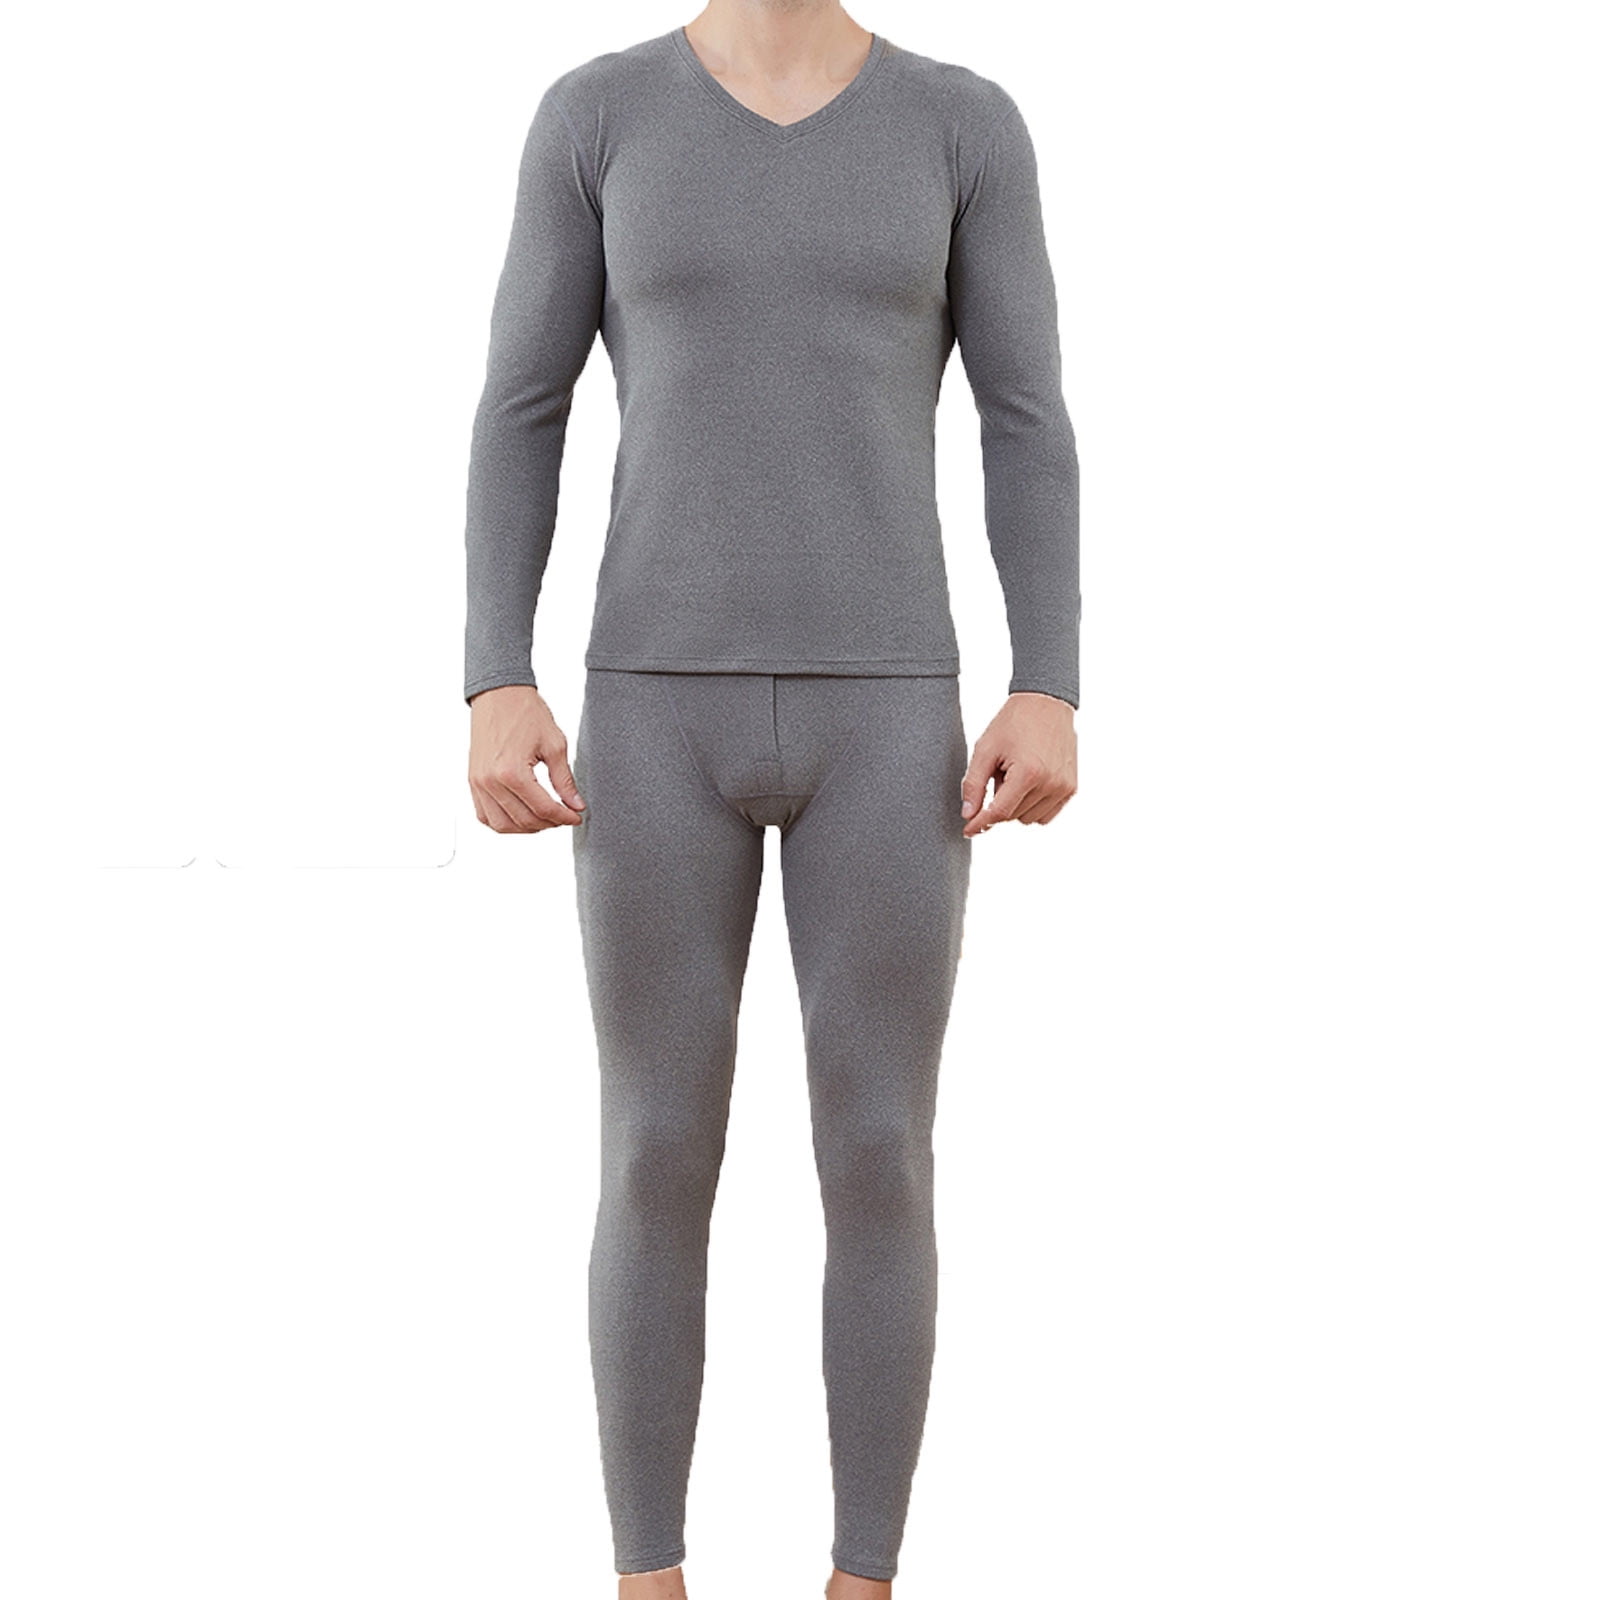 Clearance Thermal Underwear for Men Long Johns Base Layer Shirt and ...